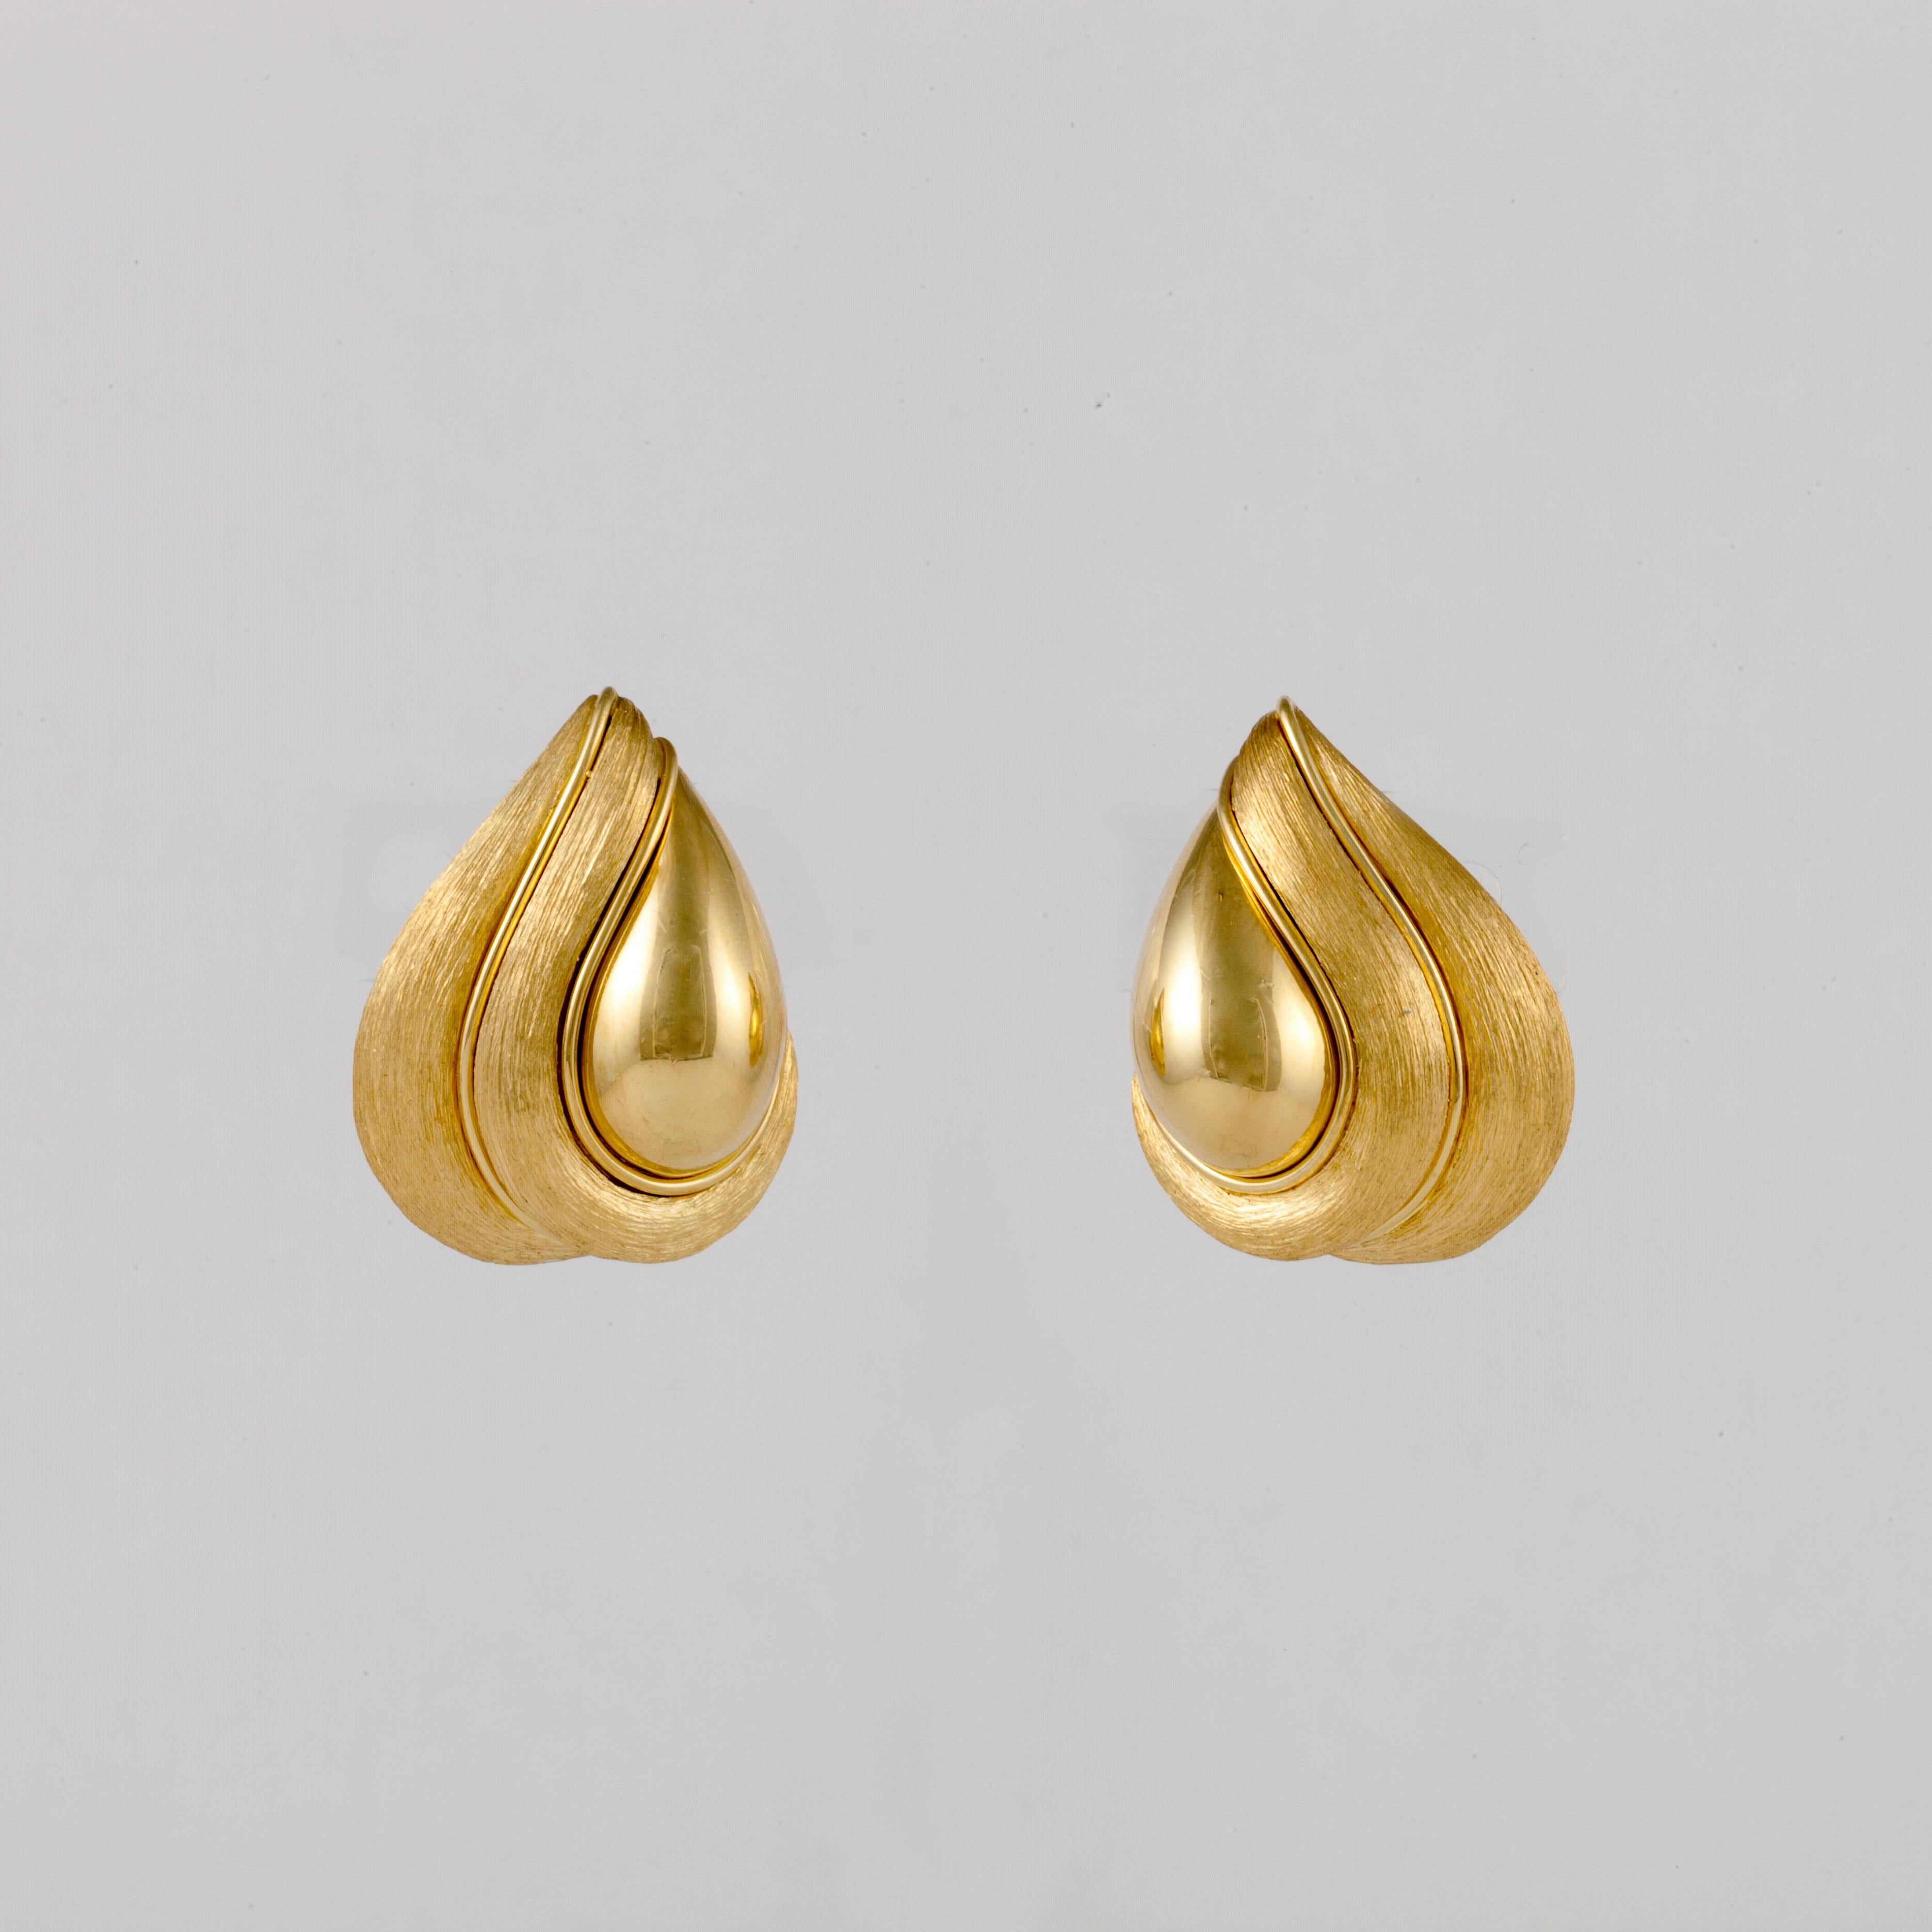 Henry Dunay earrings composed of 18K yellow gold with both the Sabi and high polish finishes.  They measure 1 1/8 inches long and 7/8 inch wide.  They are clip style earrings.